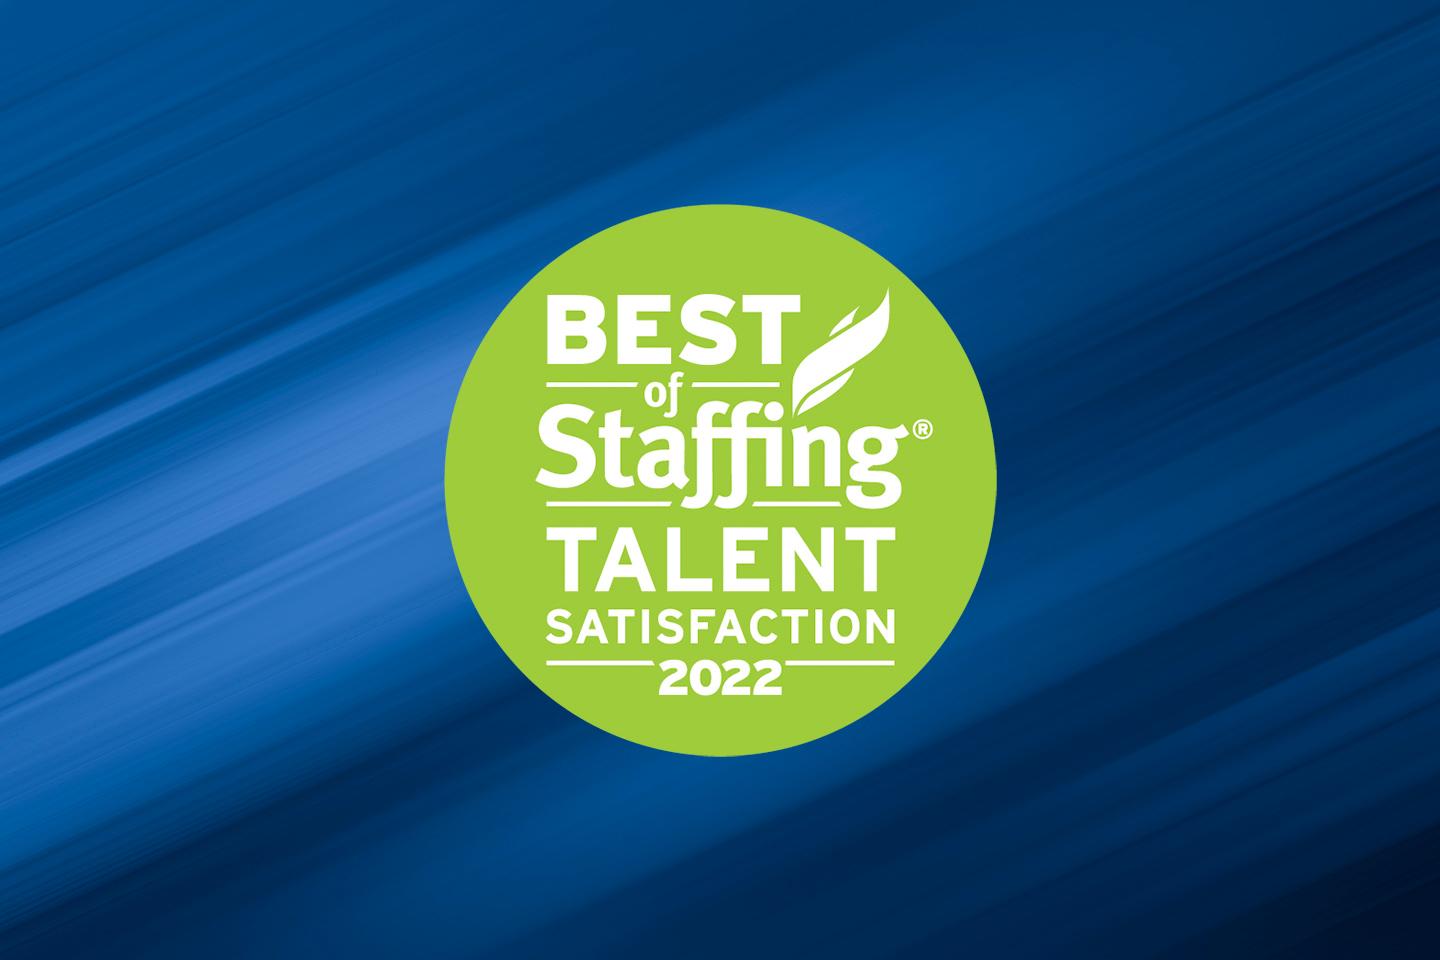 Cross Country Medical Staffing Network Wins ClearlyRated’s 2022 Best of Staffing Award for Service Excellence